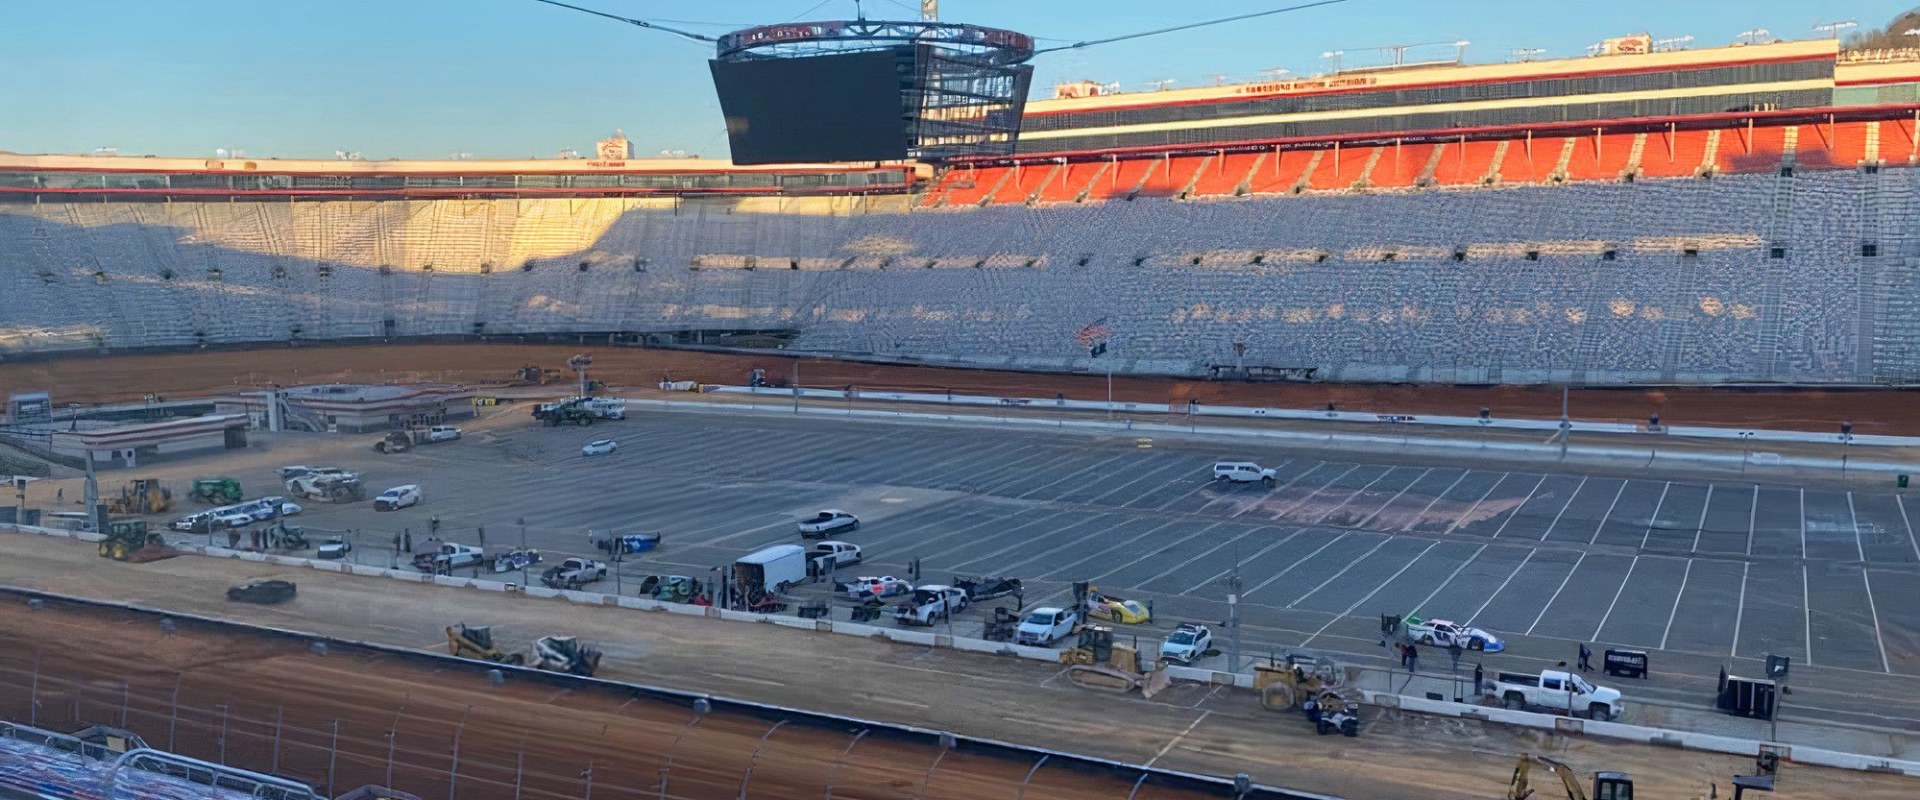 An Overview of the Sanctioning Procedure for Bristol Motor Speedway